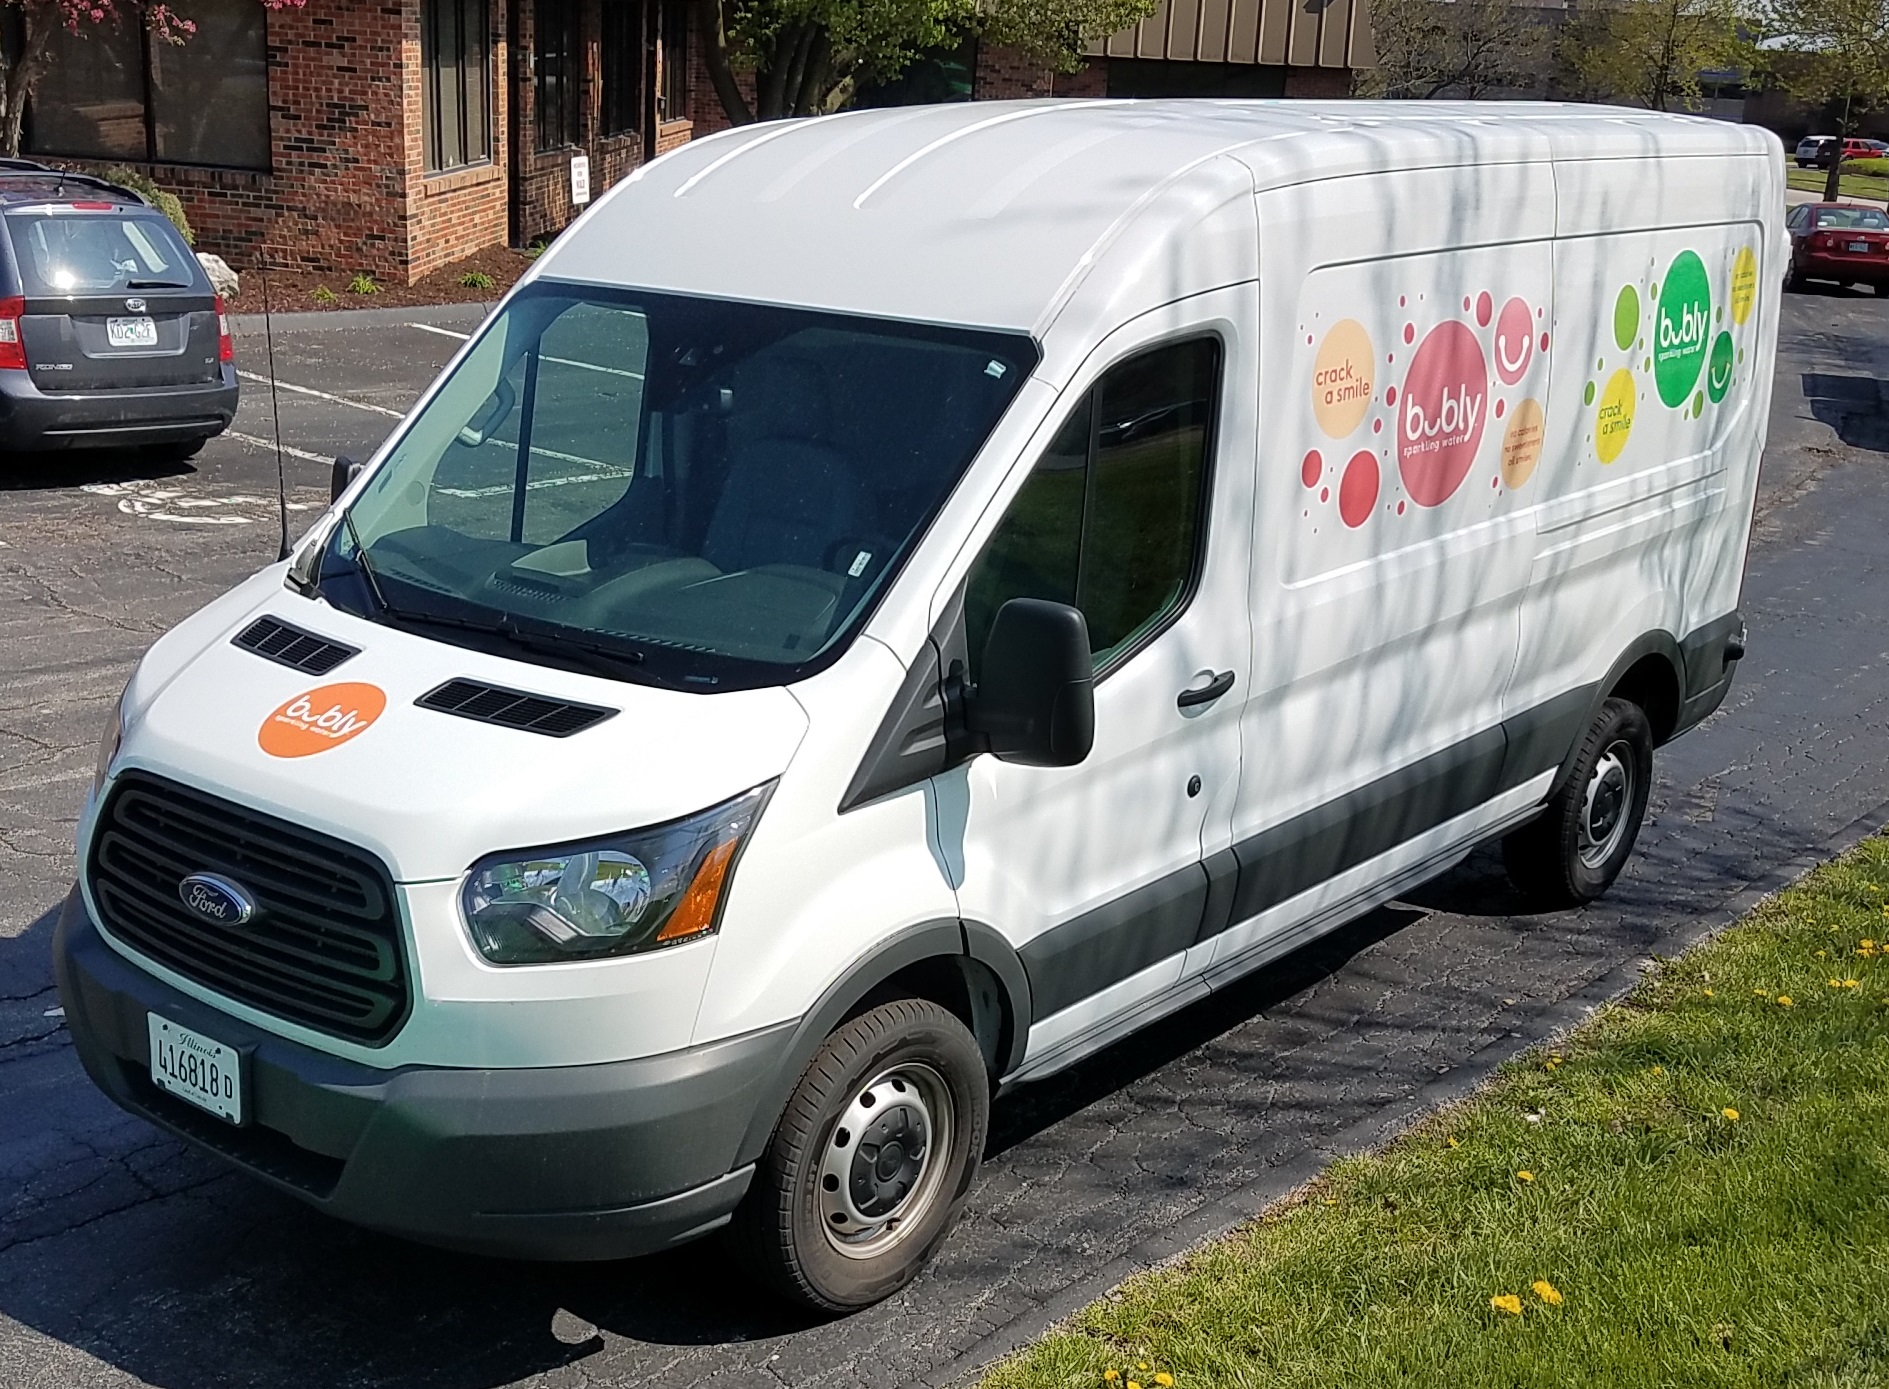 A large work van with custom designed vehicle prints on the side for Bubly sparkling water.